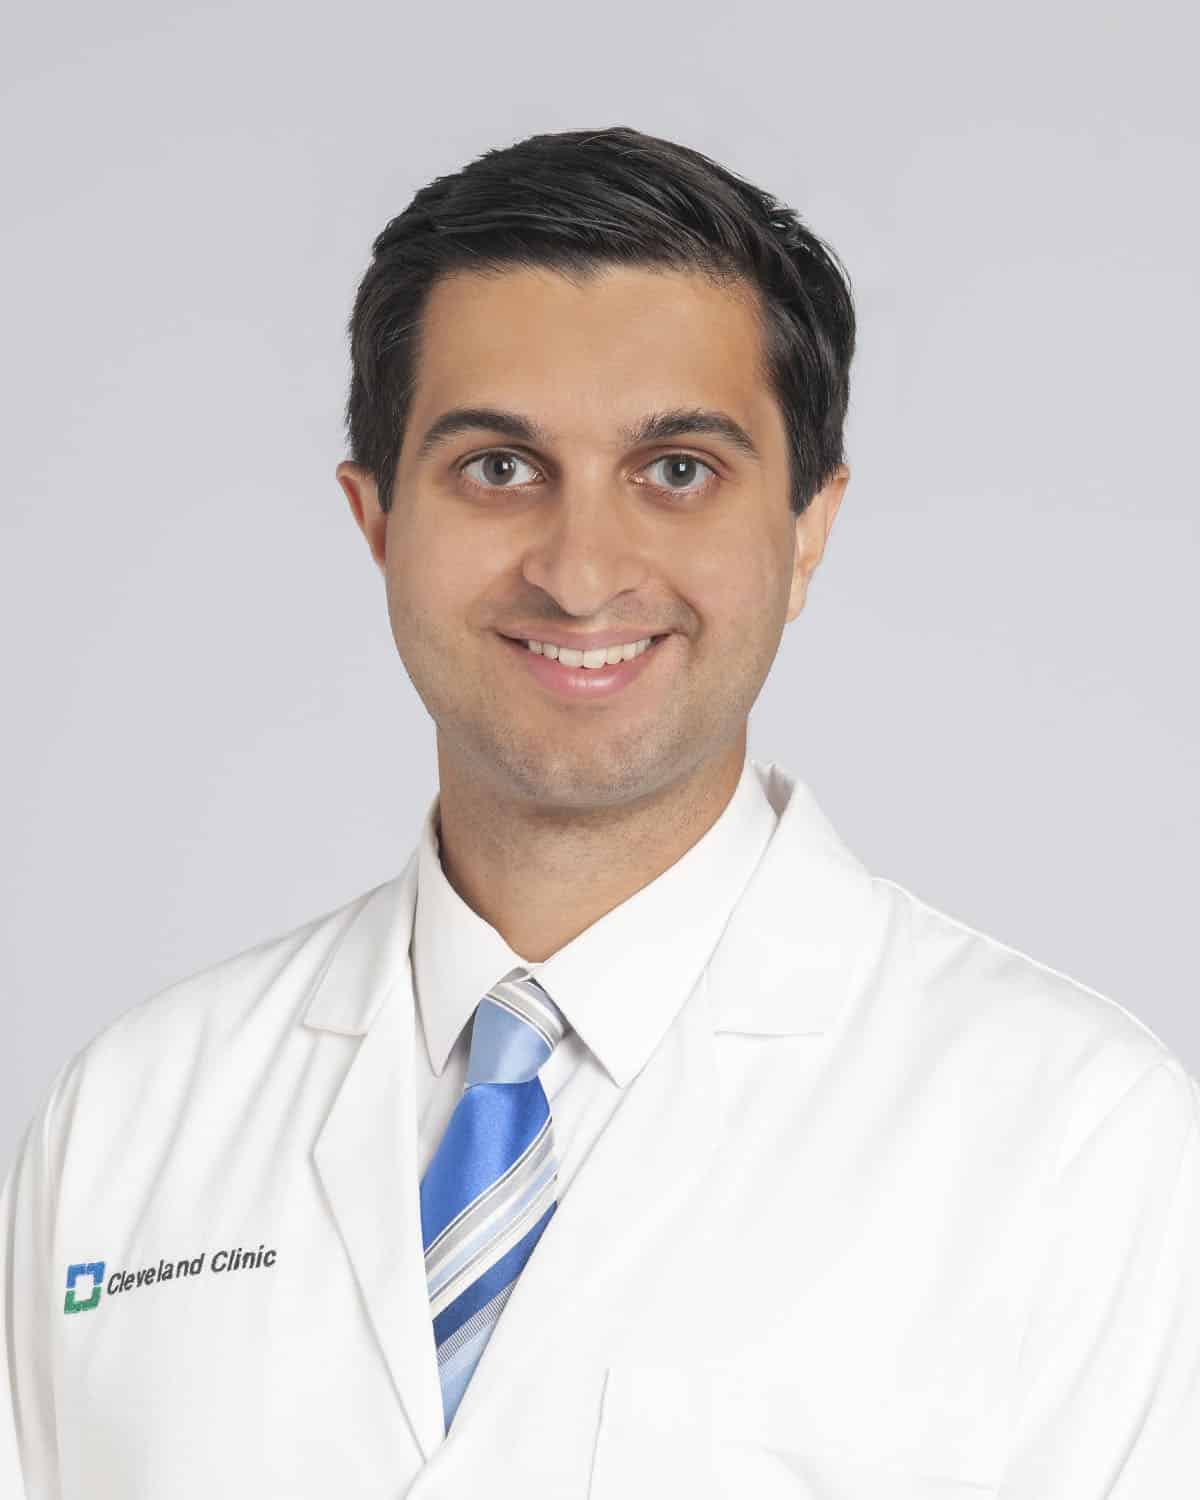 Suneel Kamath, MD, gastrointestinal oncologist, Cleveland Clinic
